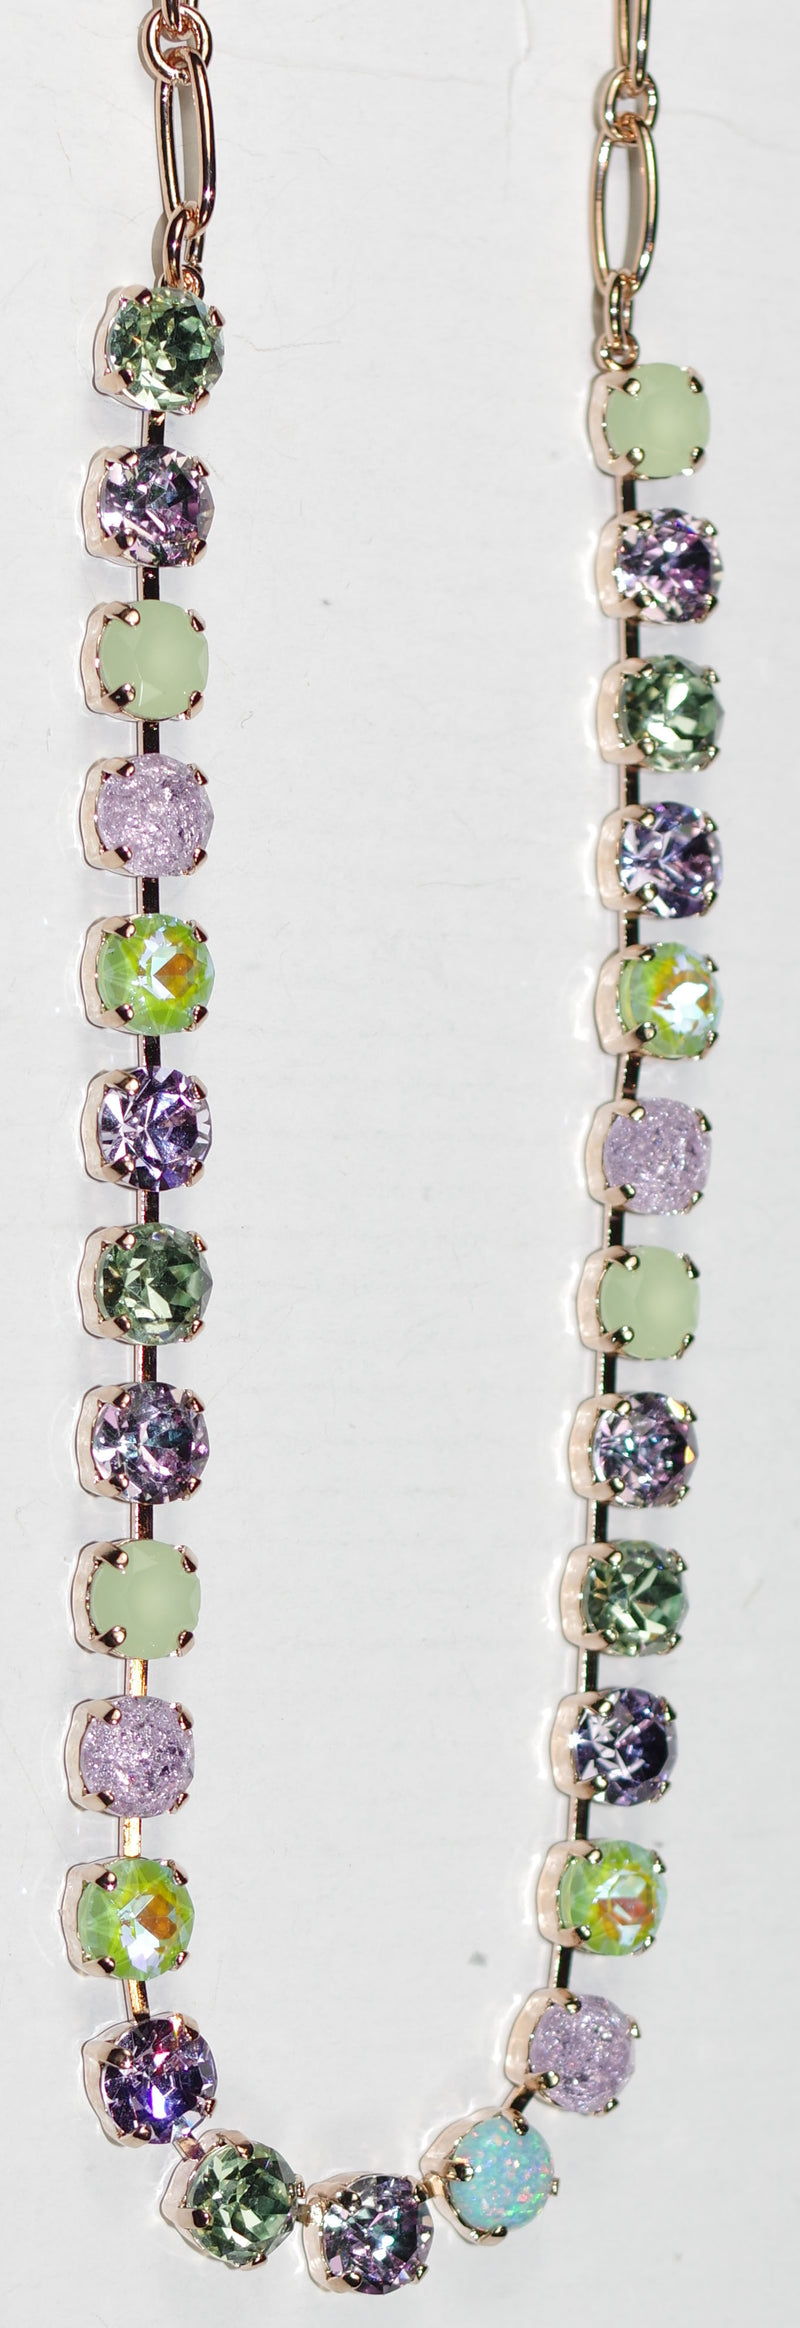 MARIANA NECKLACE BETTE MINT CHIP: lavender, green, pacific opal, simulated opal 1/4" stones in rosegold setting, 17" adjustable chain